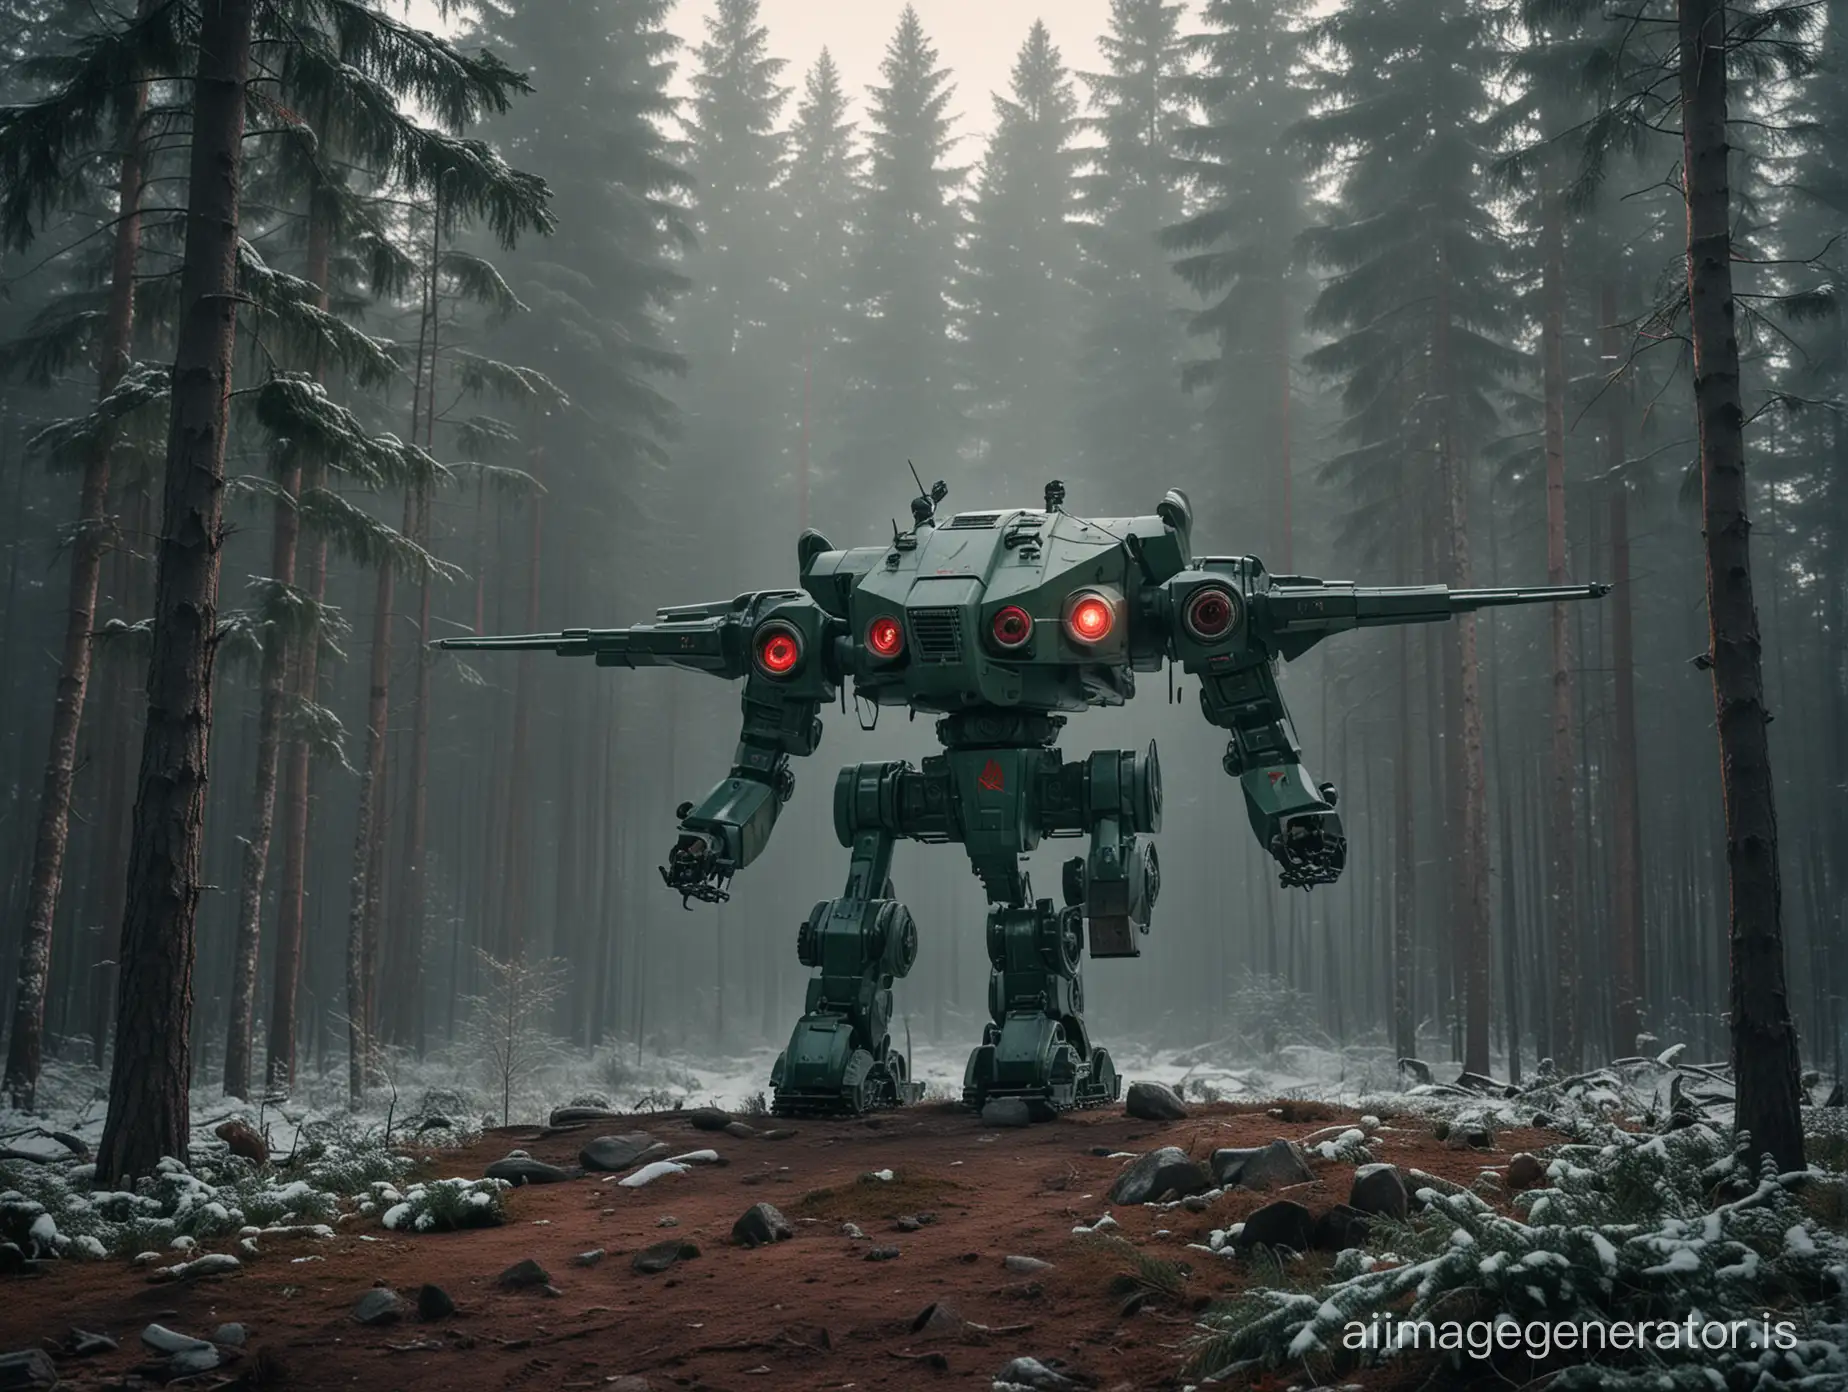 Soviet-Research-Mech-on-Levitron-in-Coniferous-Forest-at-Dawn